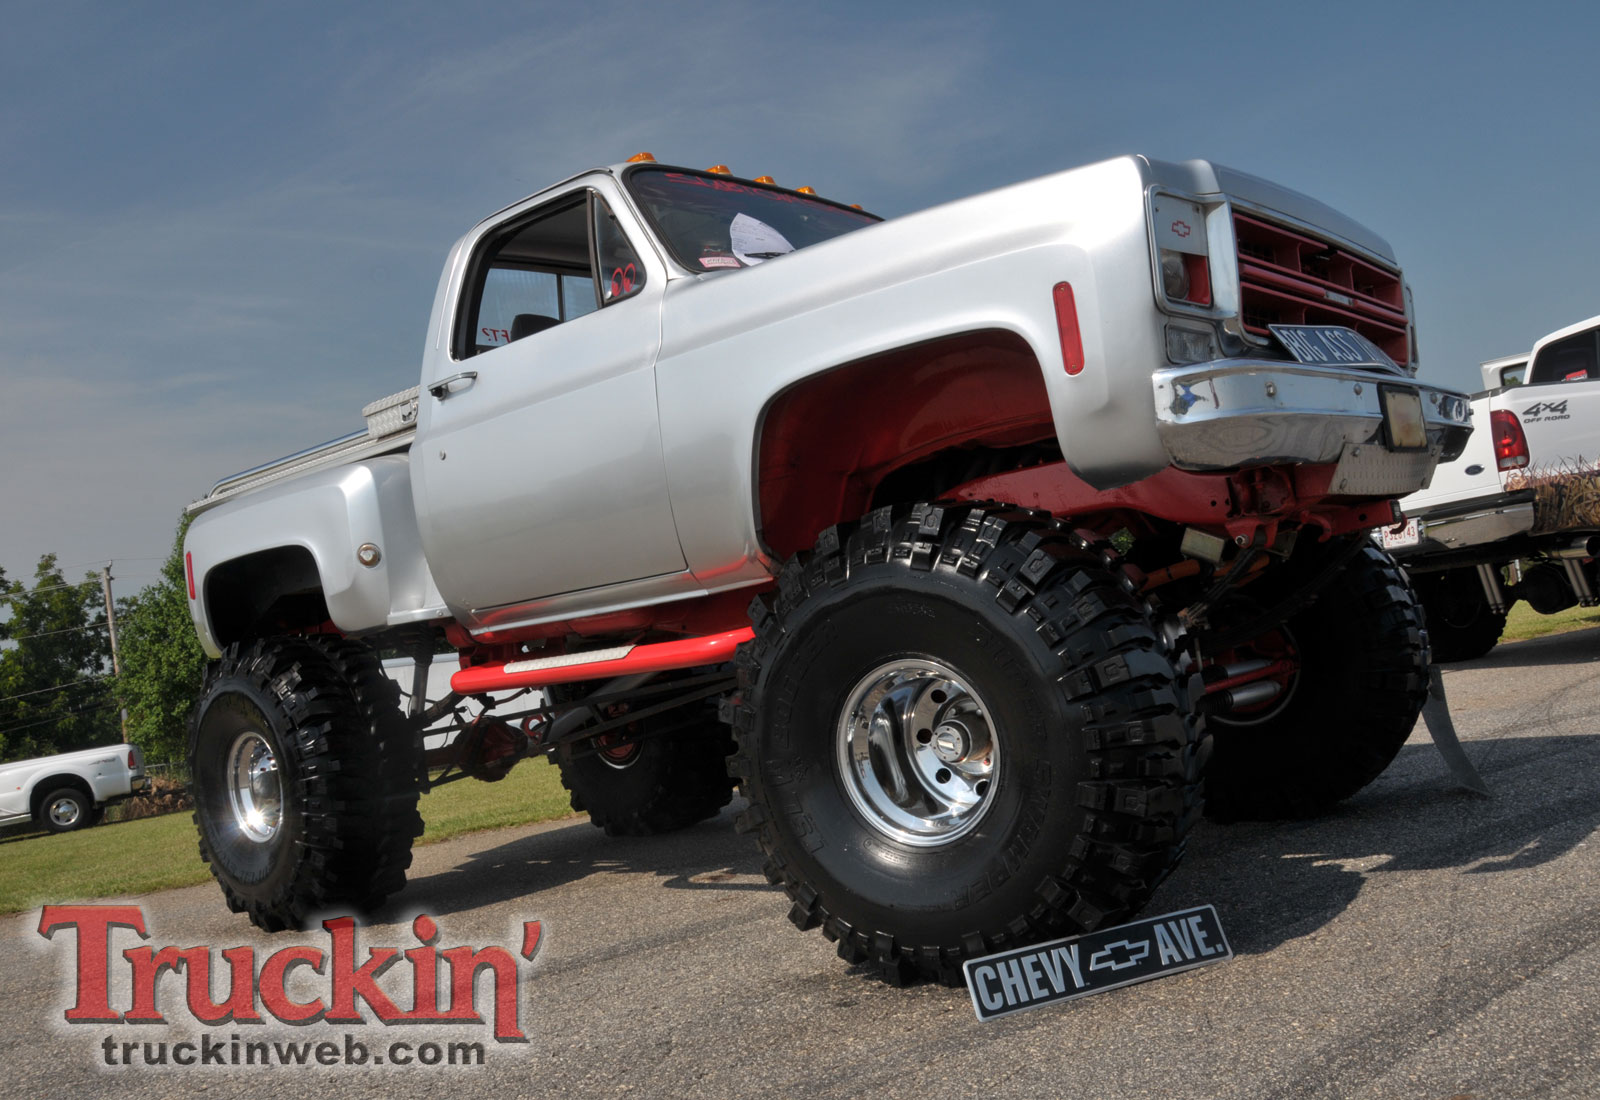 Lifted Chevy Truck Wallpaper Trucks Web Background